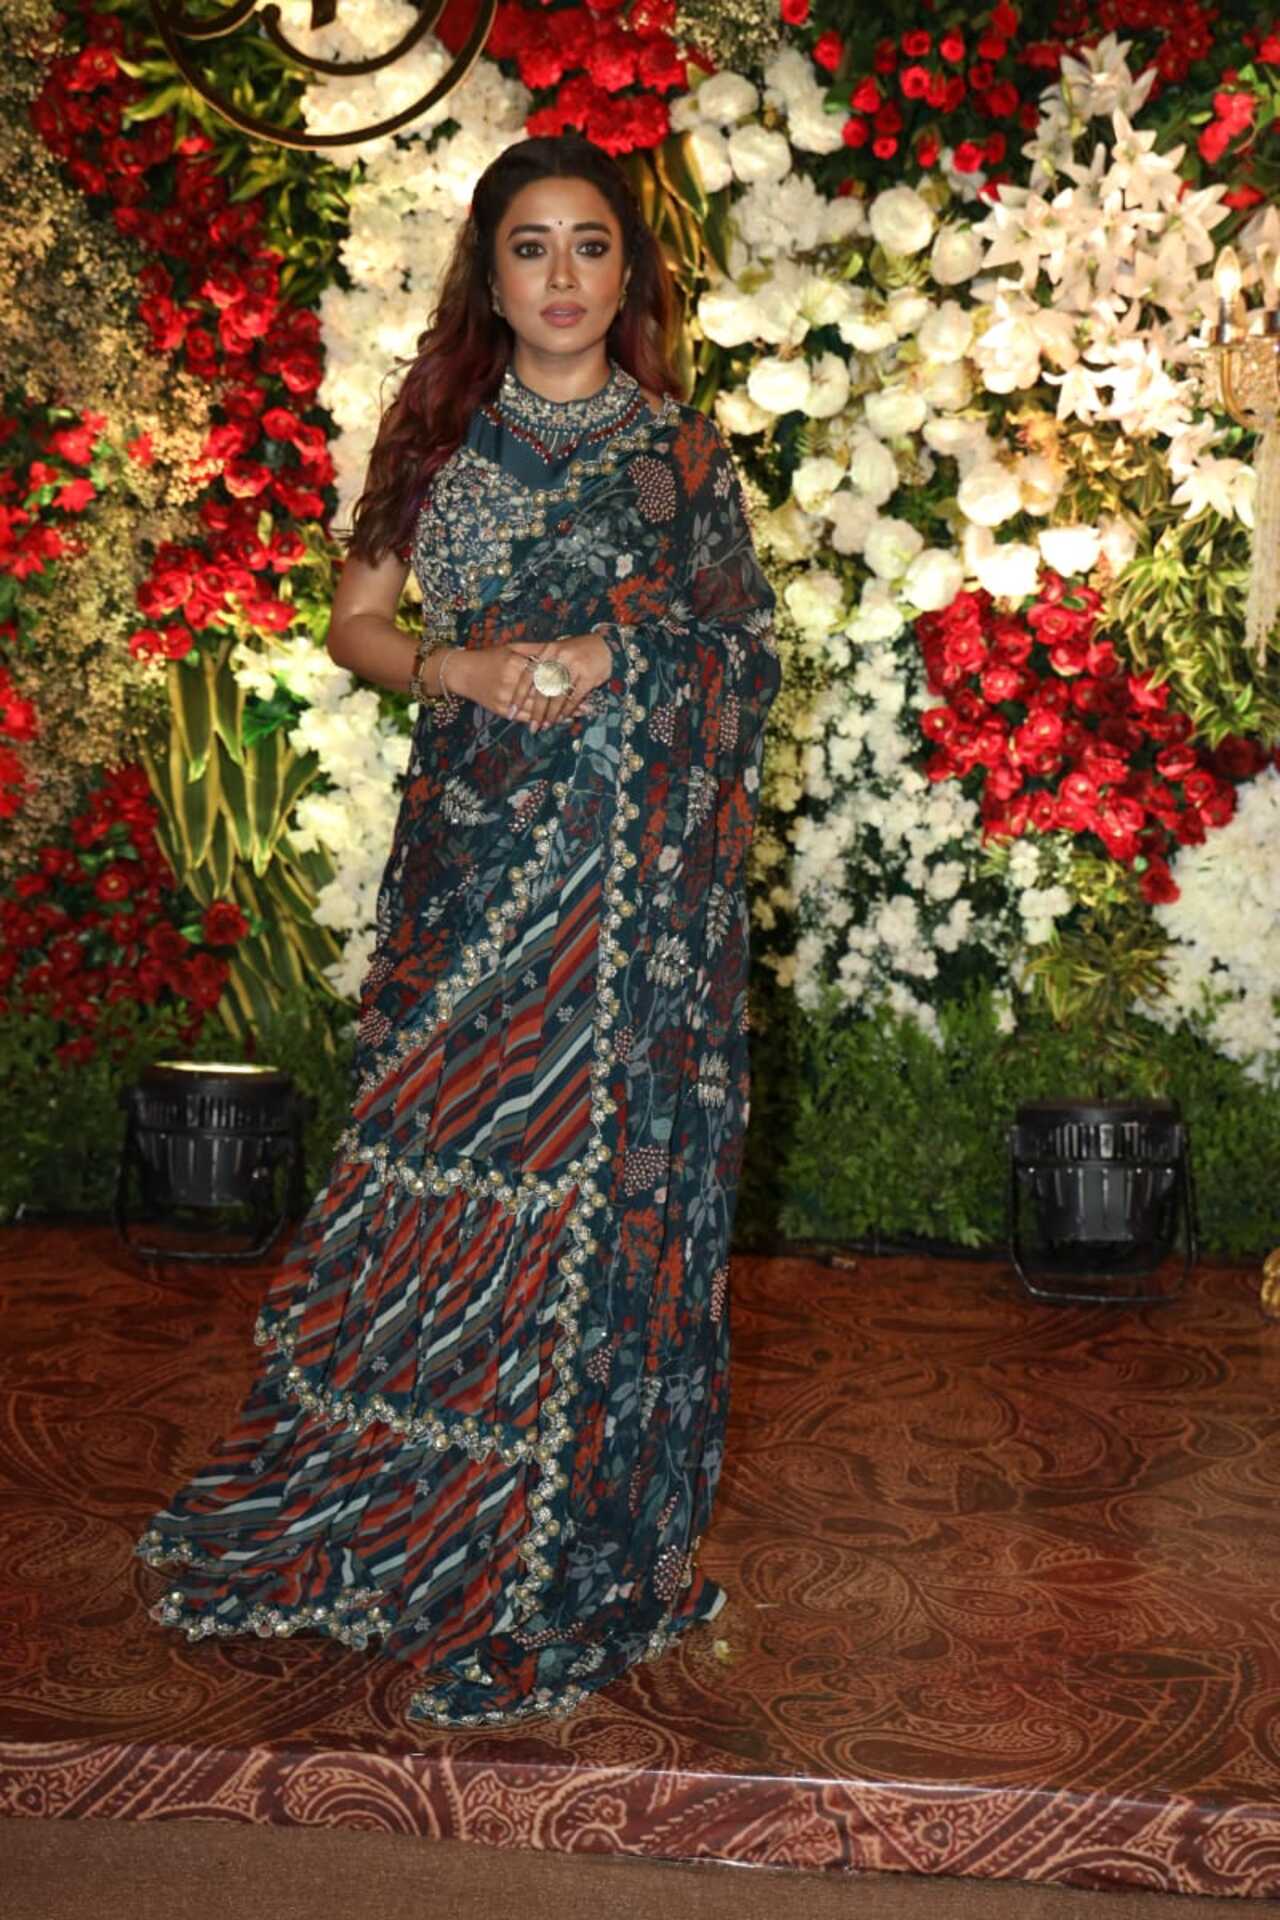 Tina Dutta looked stunning in a multi-coloured printed saree